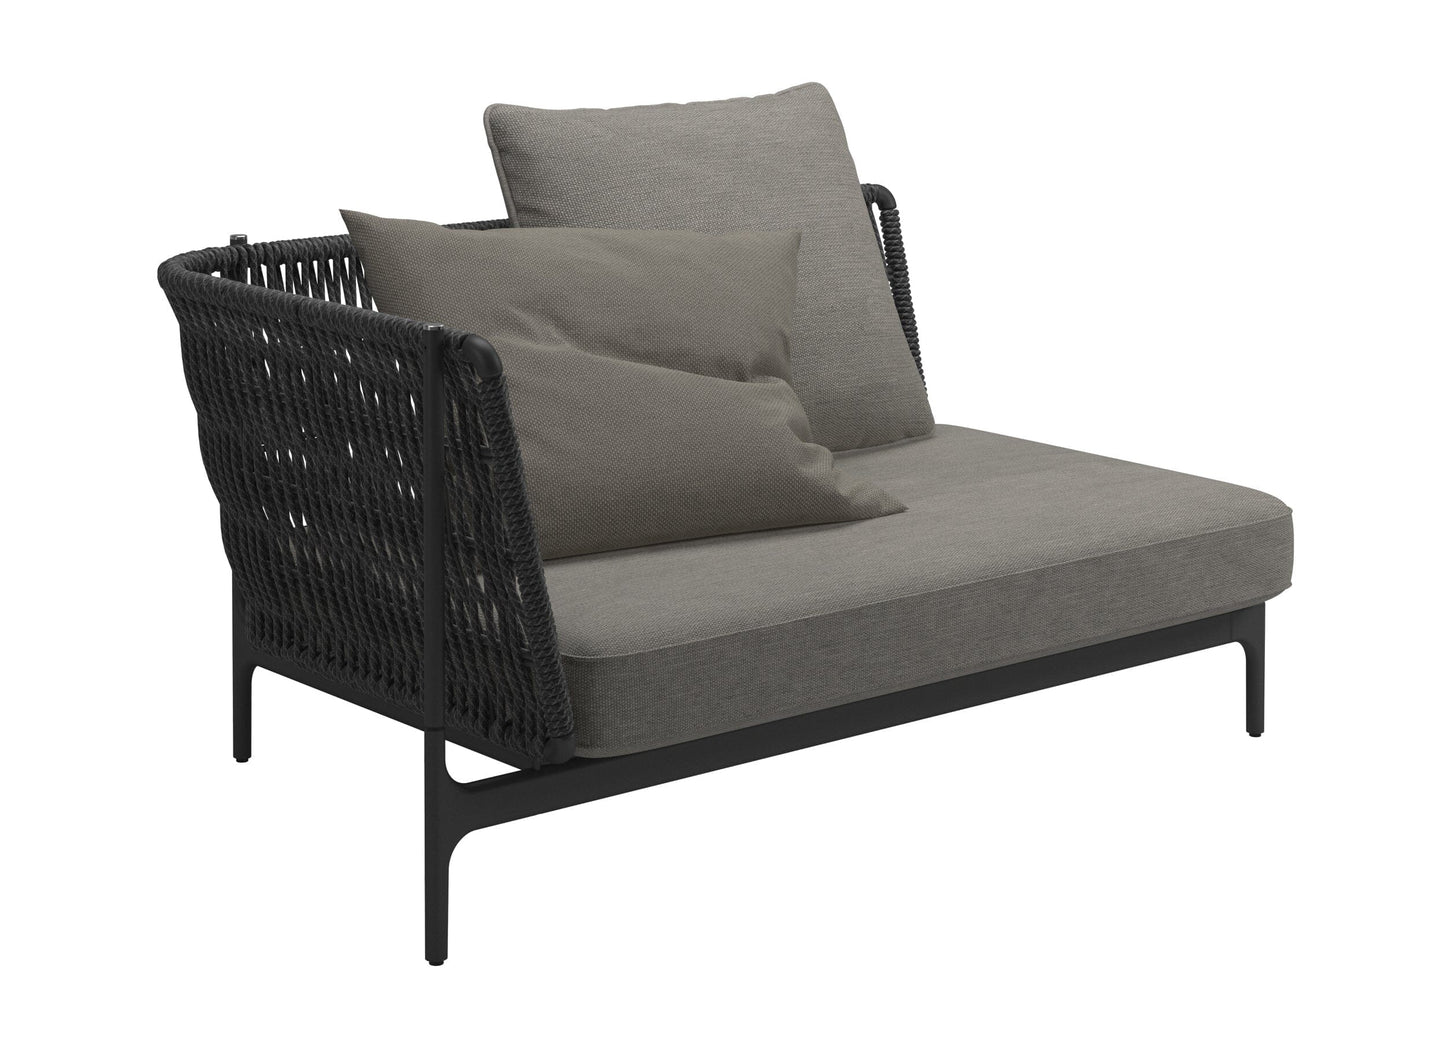 Grand Weave Modular Set 2 in Meteor Outdoor Furniture Gloster 